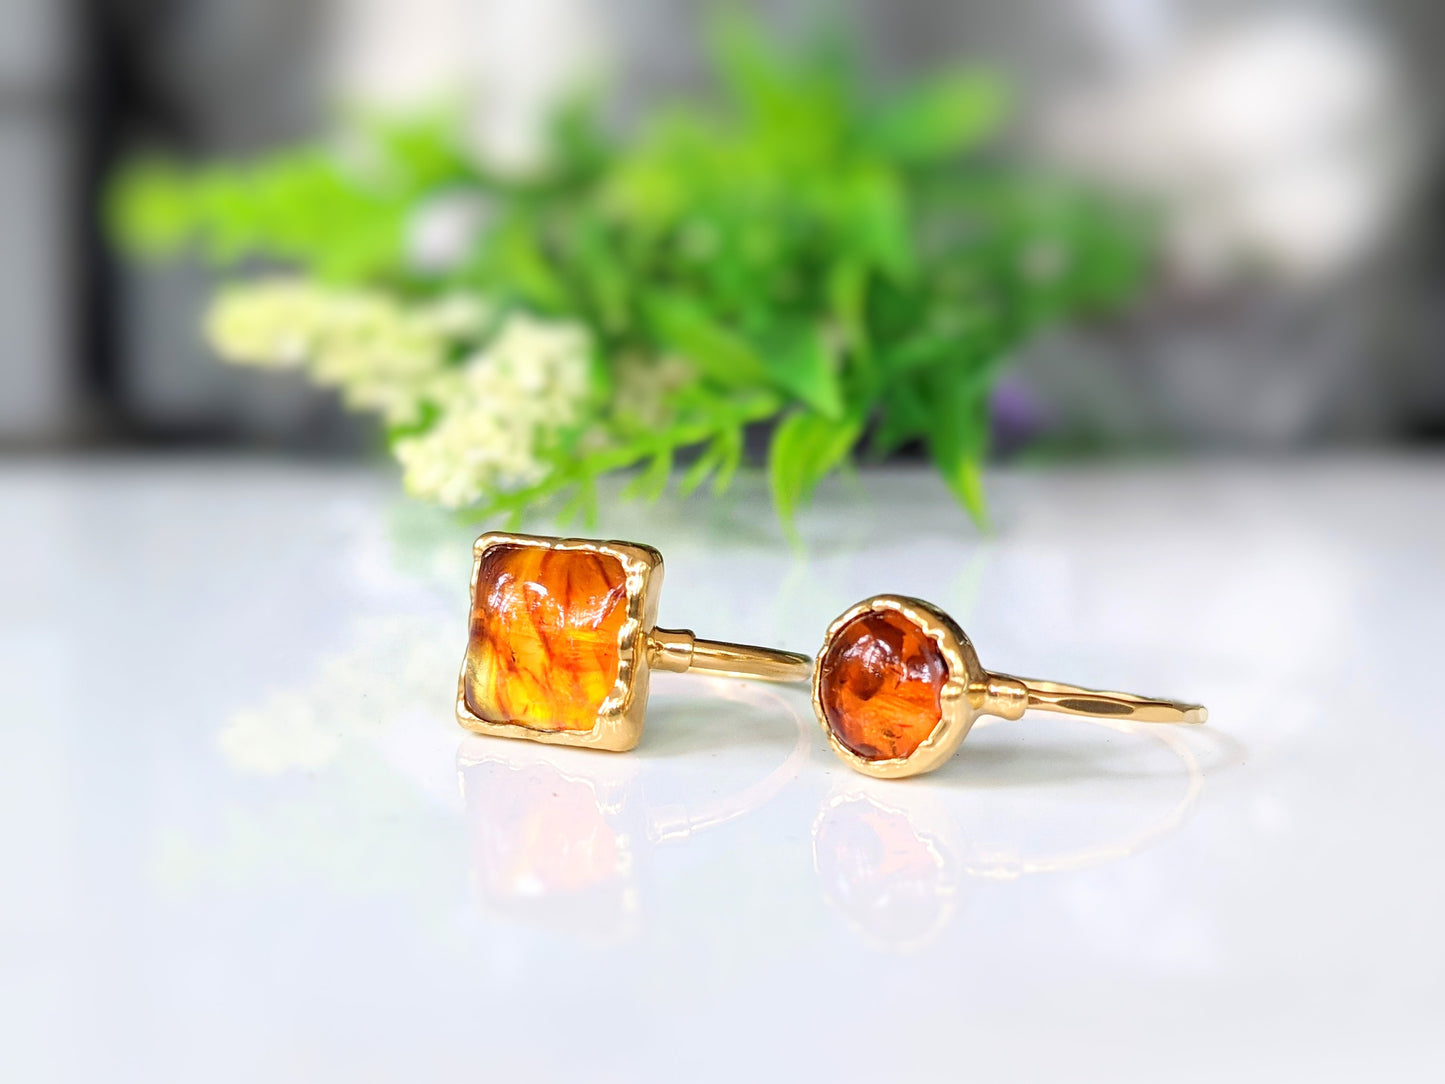 Square and round Baltic Amber rings in unique 18k Gold setting